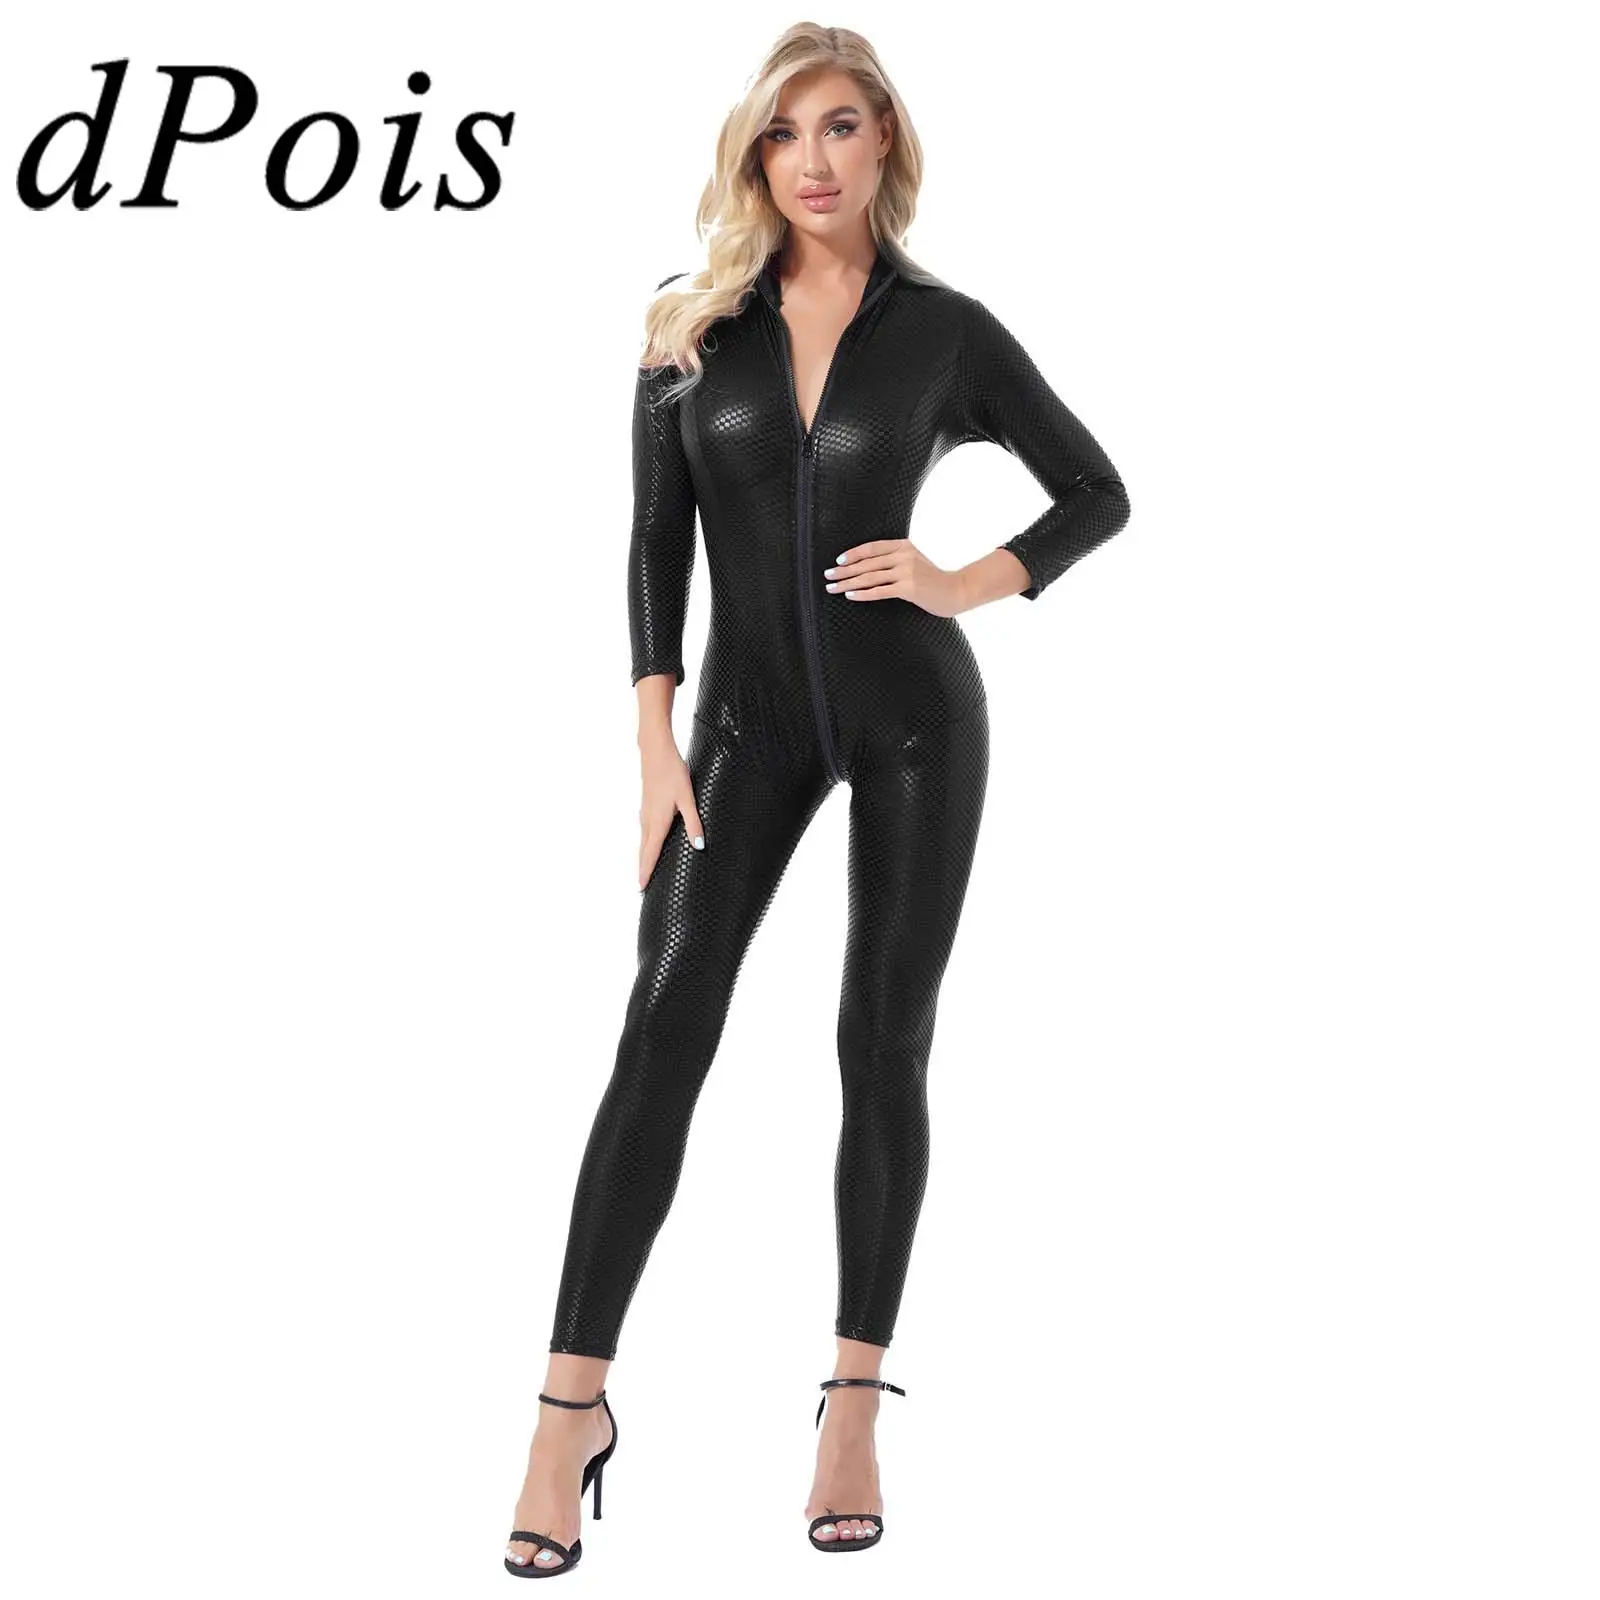 

Womens Patent Leather Catsuit Skinny Jumpsuit Female Clubwear Pole Dance Stage Show Costume High Neck Long Sleeve Playsuits